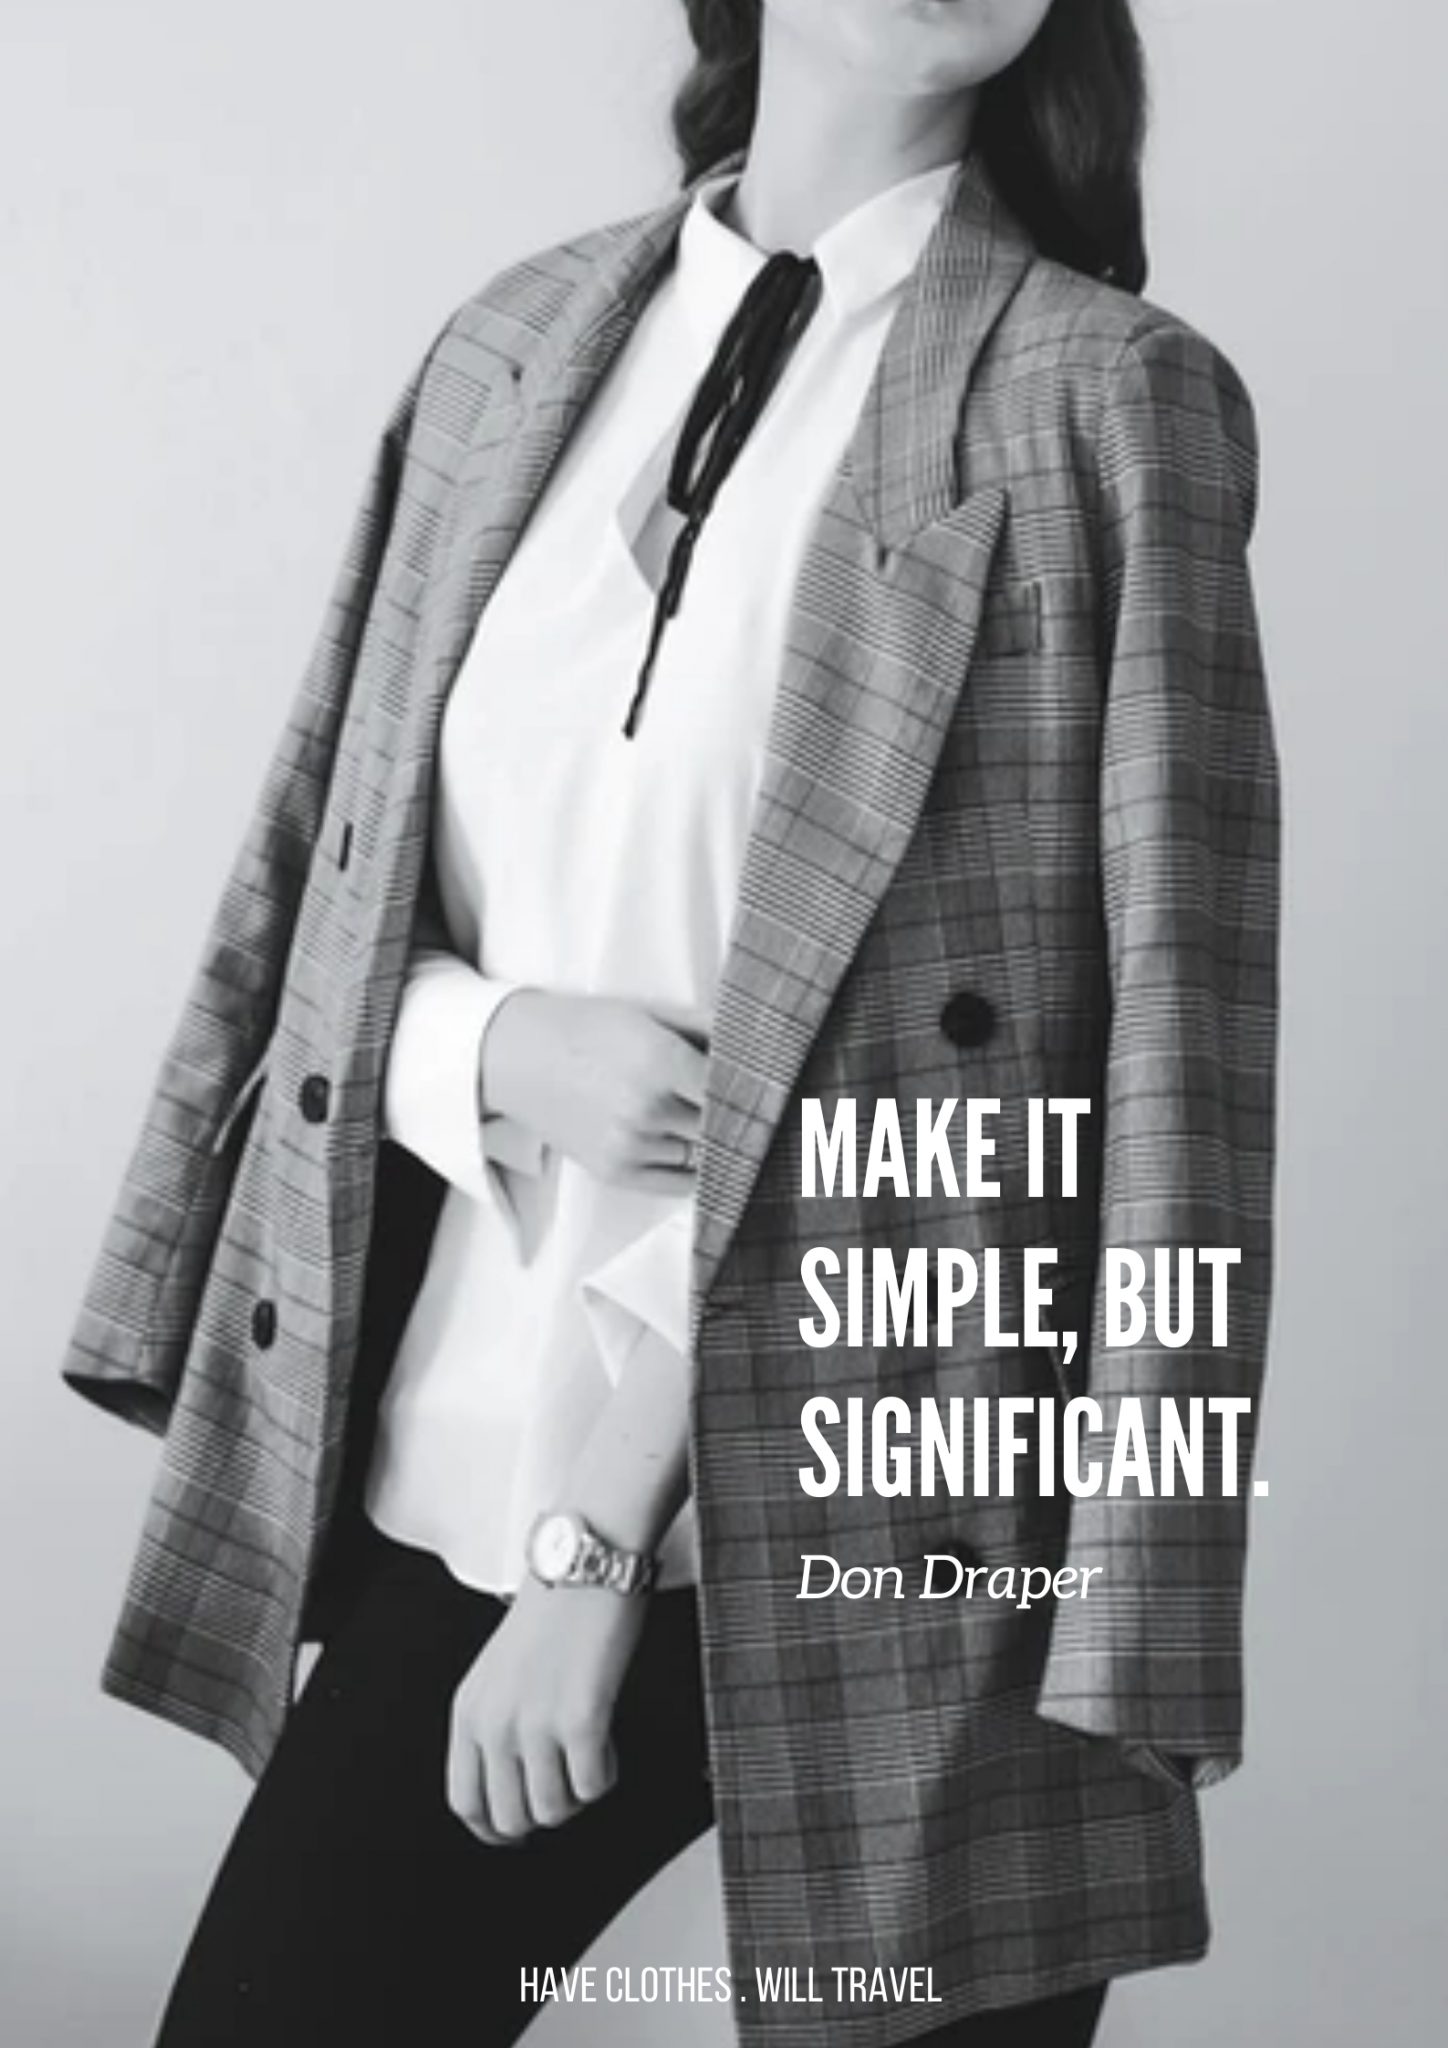 A high-fashion style black and white photo of a model wearing black pants, a white shirt, and a plaid blazer over her shoulders. White text on the image says, "Make it simple but significant. - Don Draper"